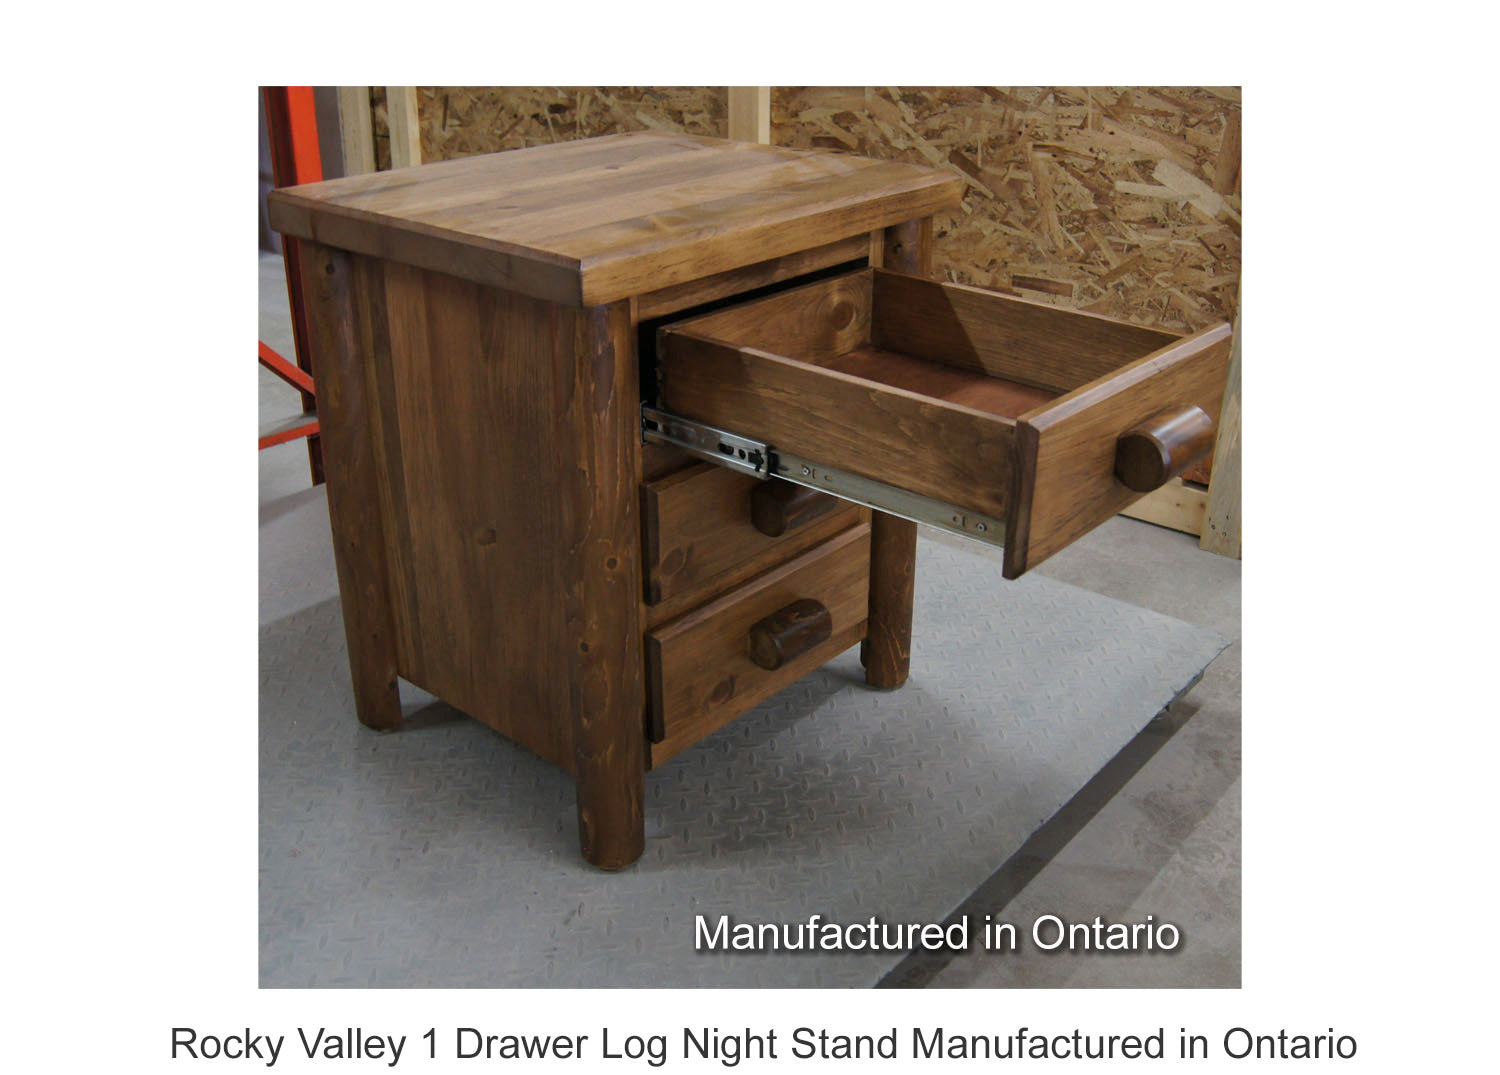 Rocky Valley 1 Drawer Log Night Stand Manufactured in Ontario